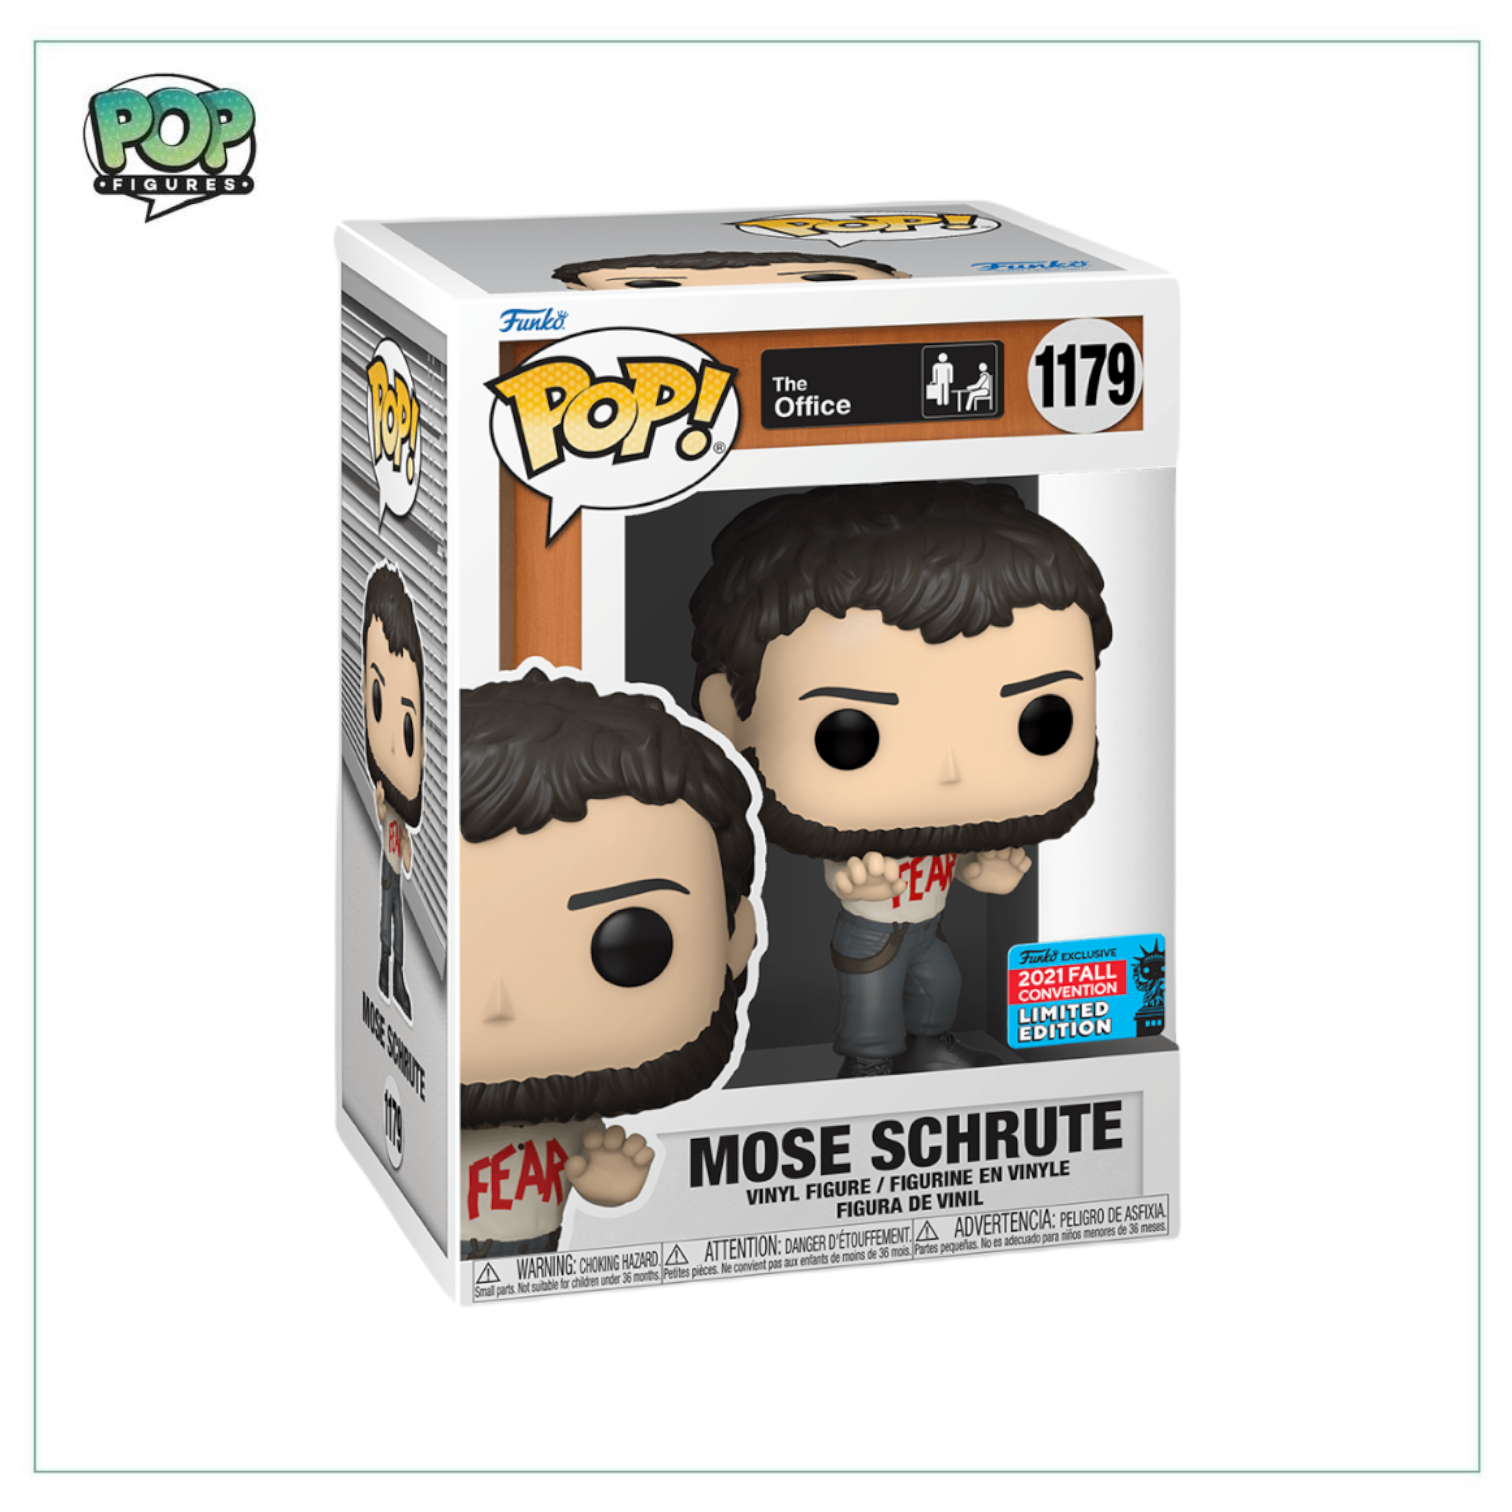 Mose Schrute #1179 Funko Pop! The Office -  2021 NYCC Shared Exclusive